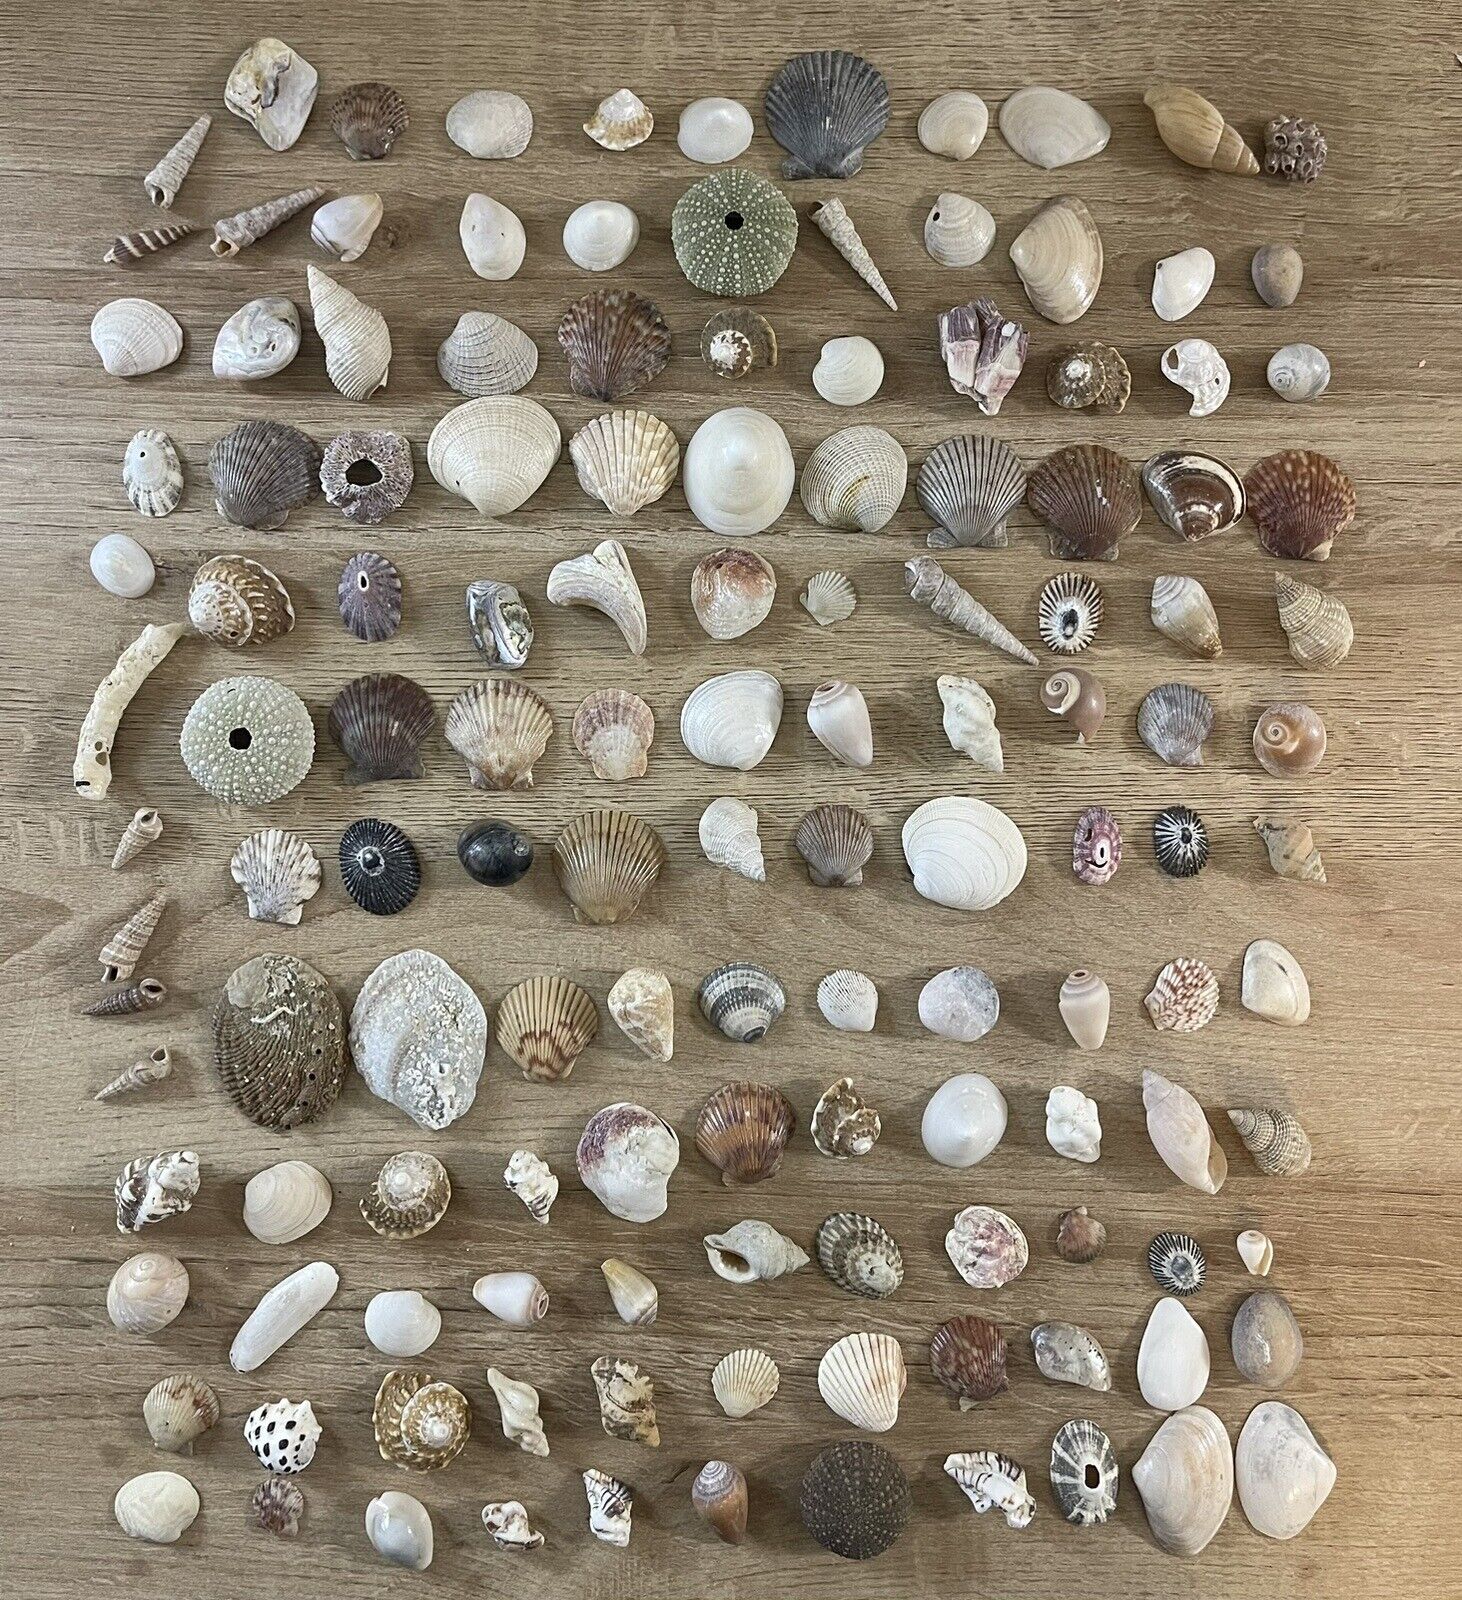 Massive 500+ Unsearched Mixed Sea Shell Lot - Estate Sale Find